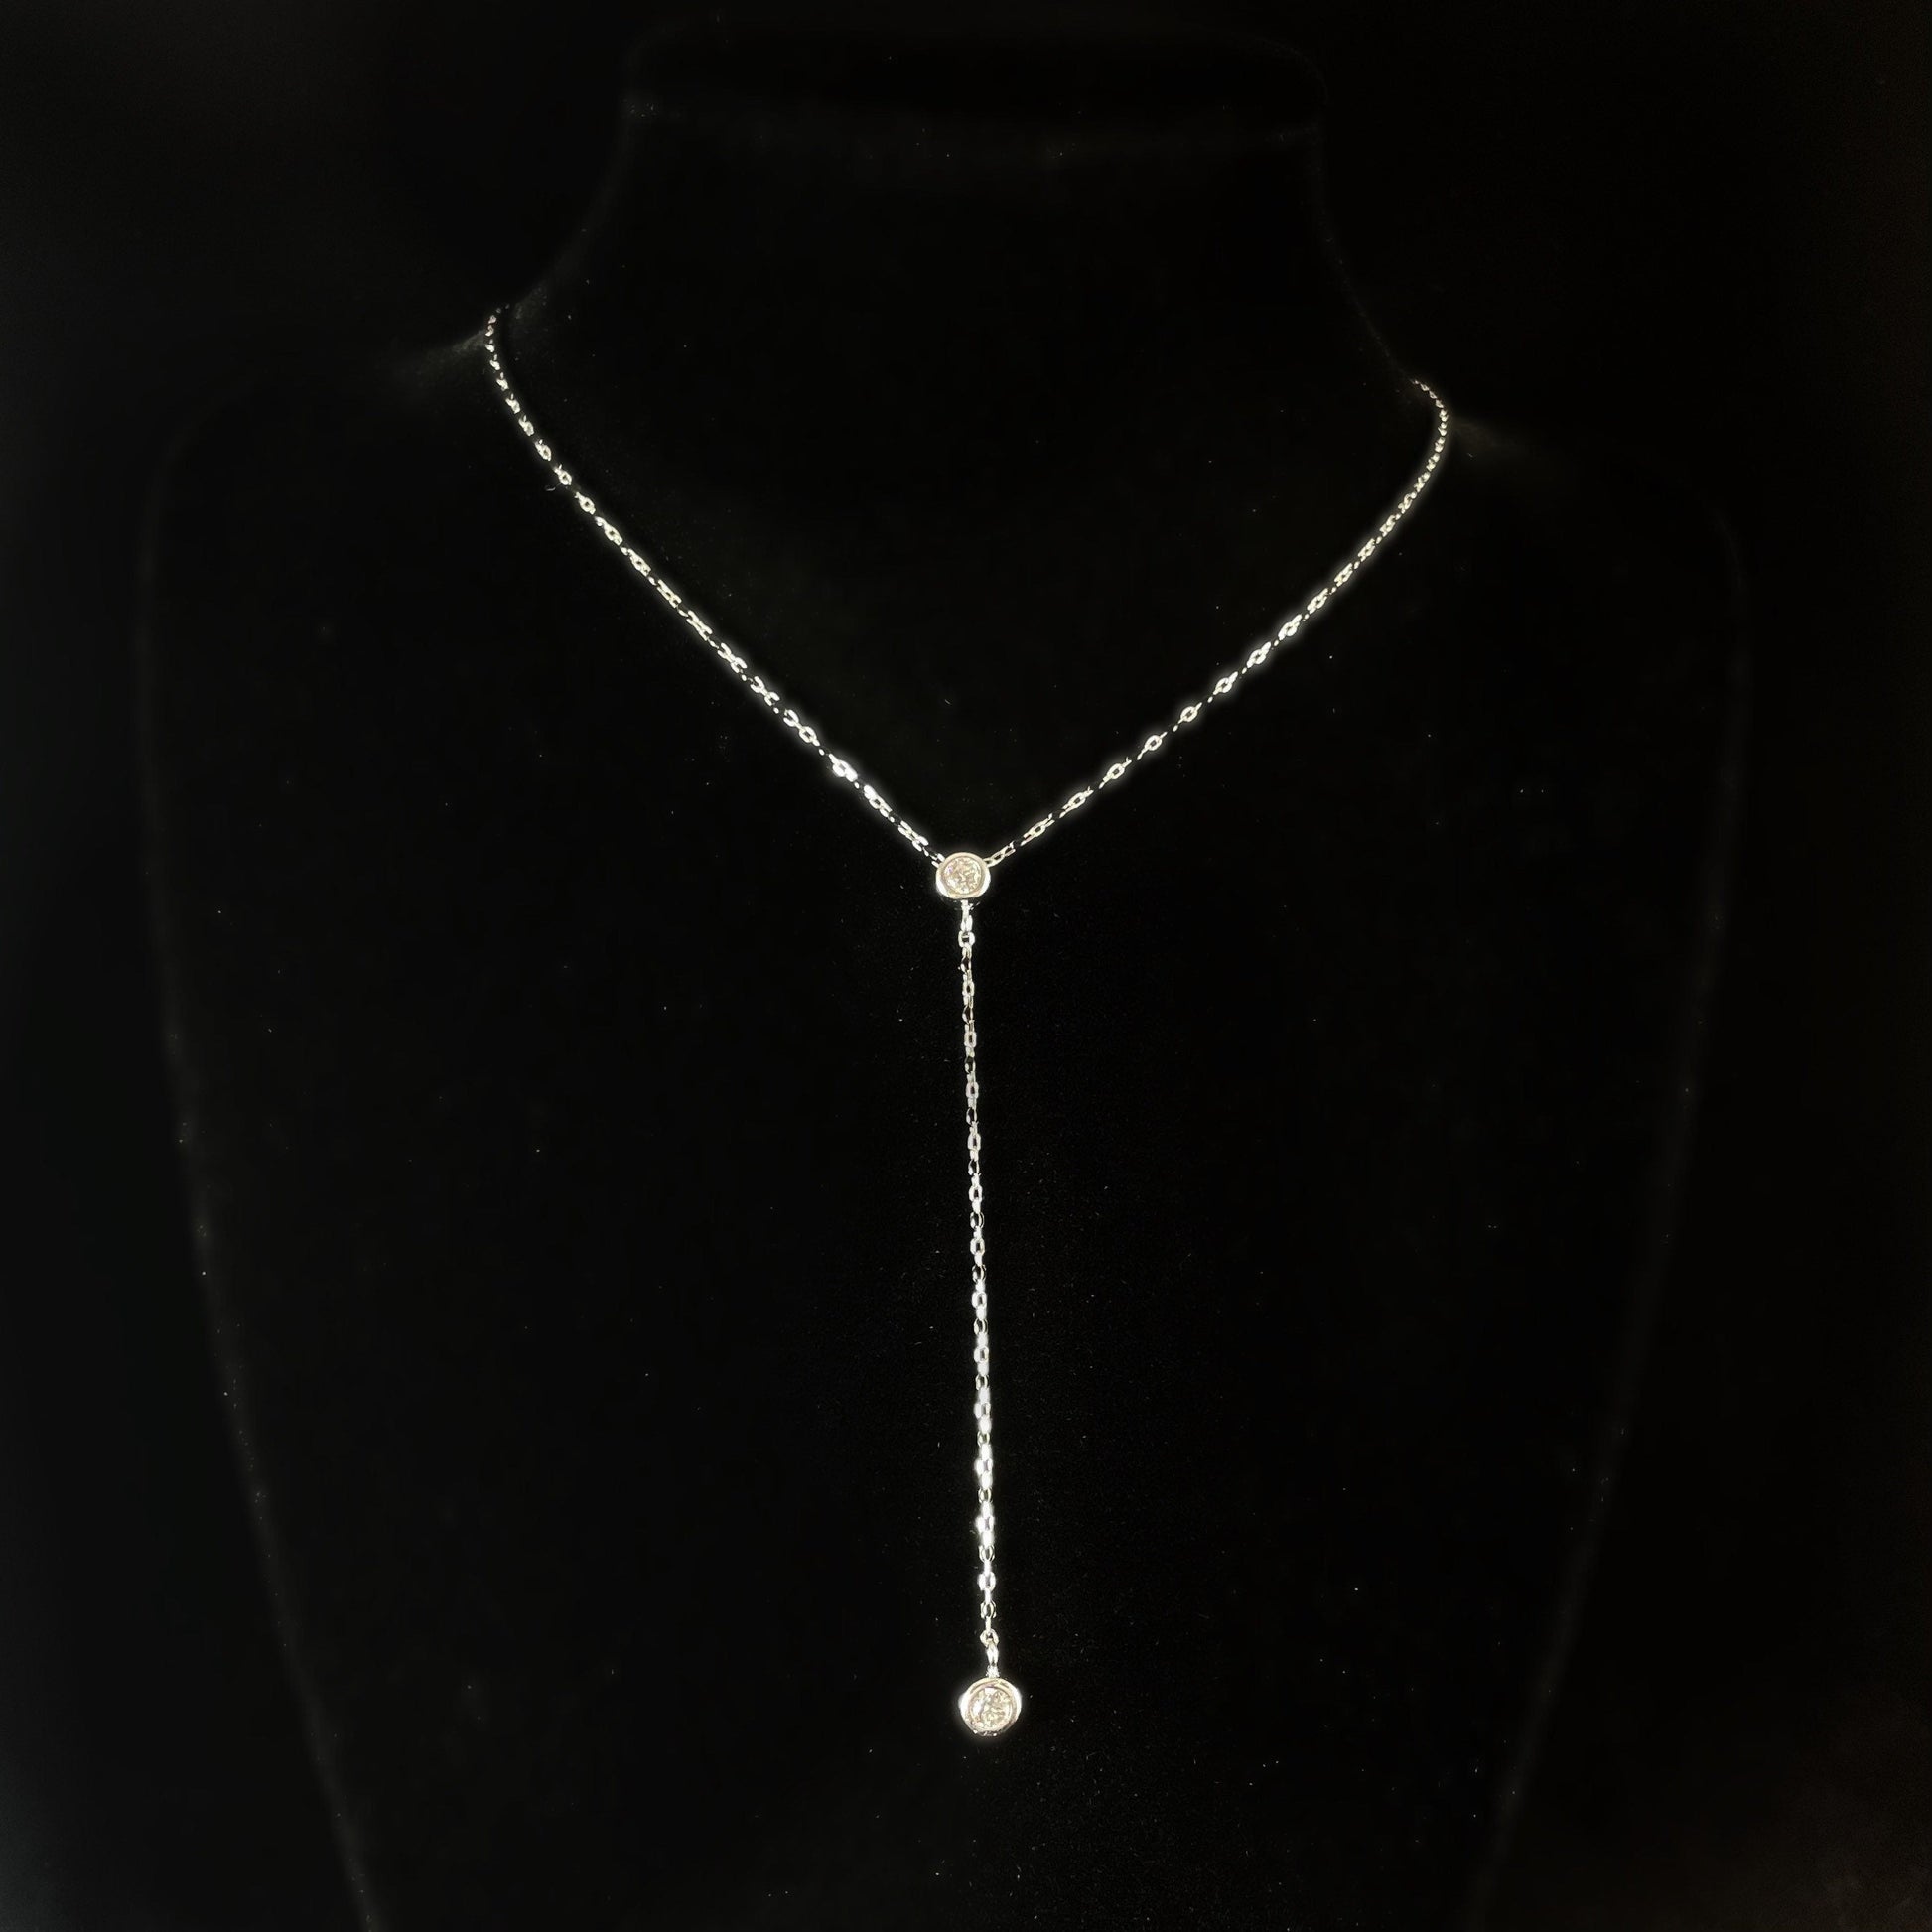 Silver Chain Necklace with Crystal - Handmade in Spain